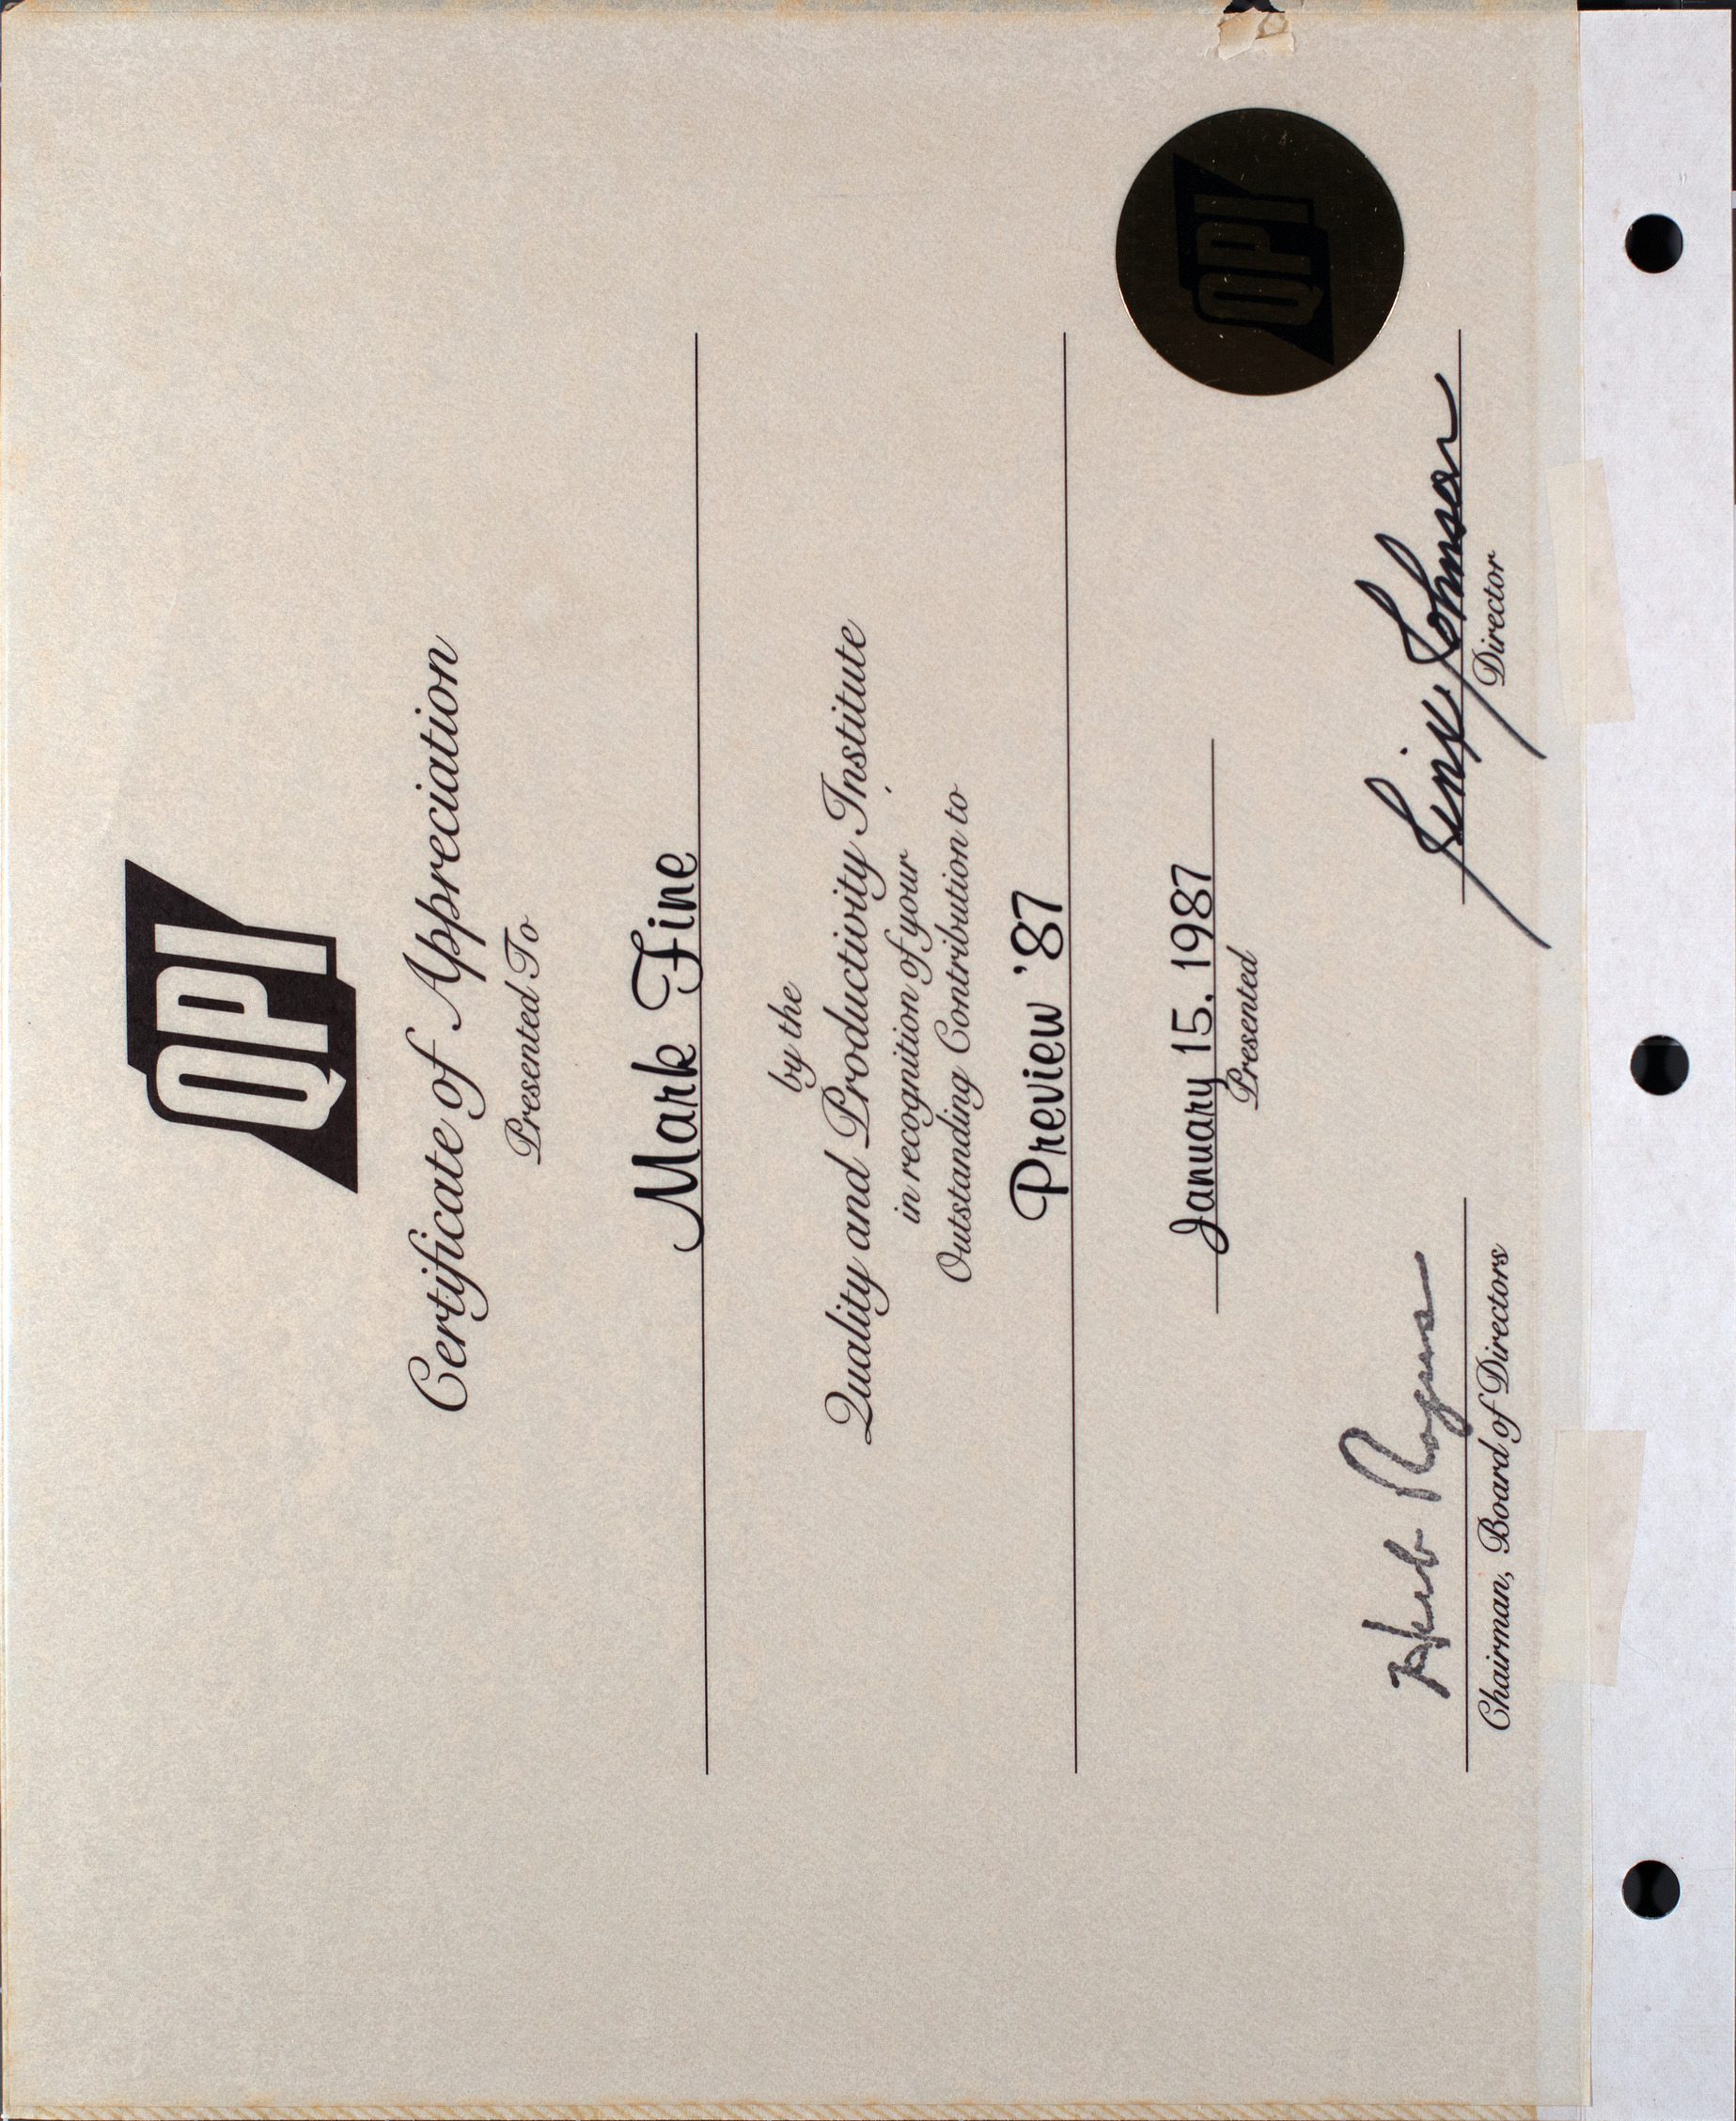 Certificate of appreciation for Mark Fine for Preview '87, January 15, 1987